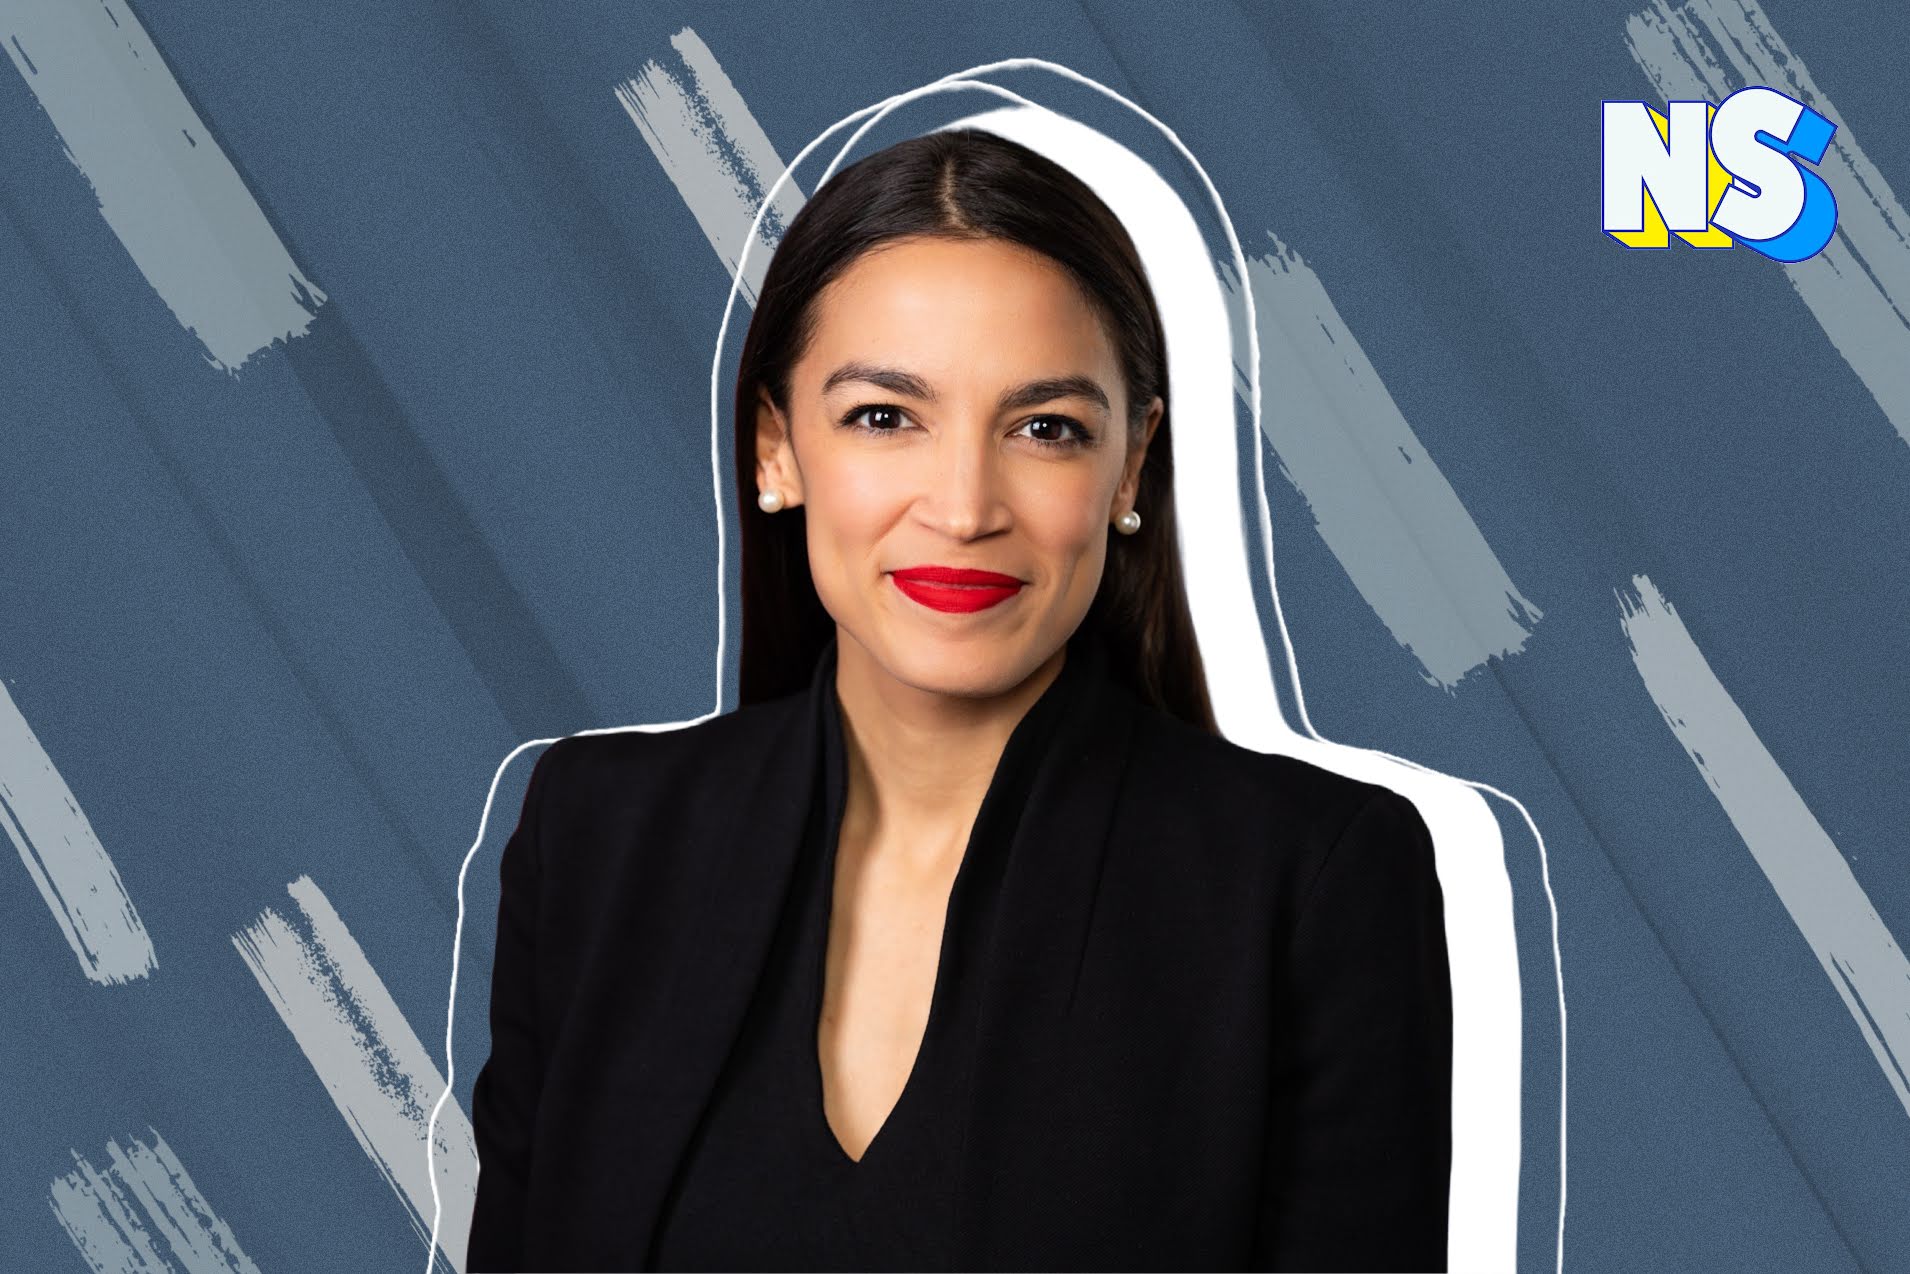 Latinas Are Fighting Back: Alexandra Ocasio-Cortez Reminds Us of the Importance of Speaking Up